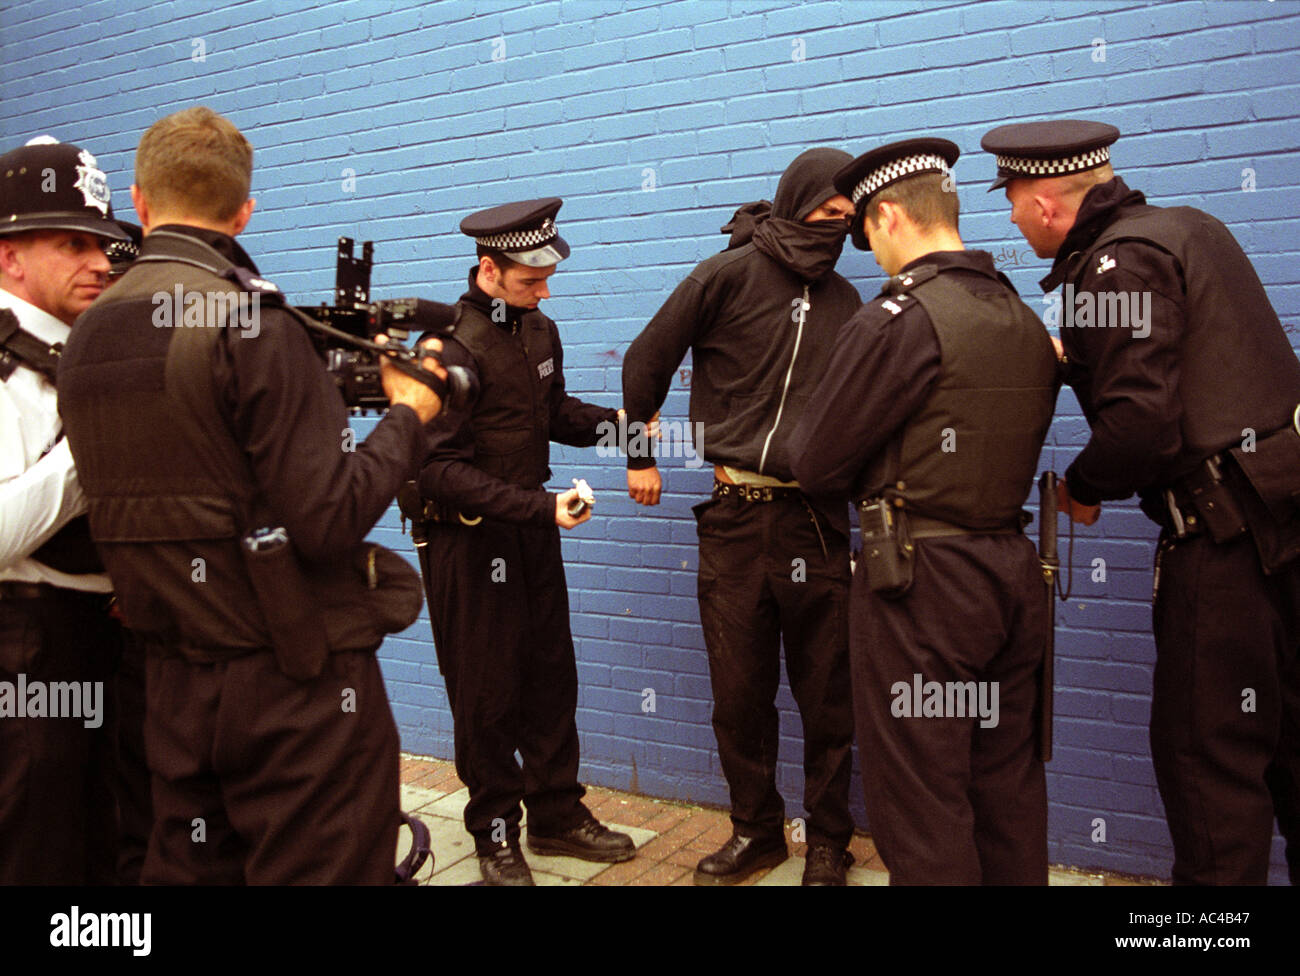 Young demonstrator being searched by police under section 44 at an arms trade demonstration in London. Stock Photo